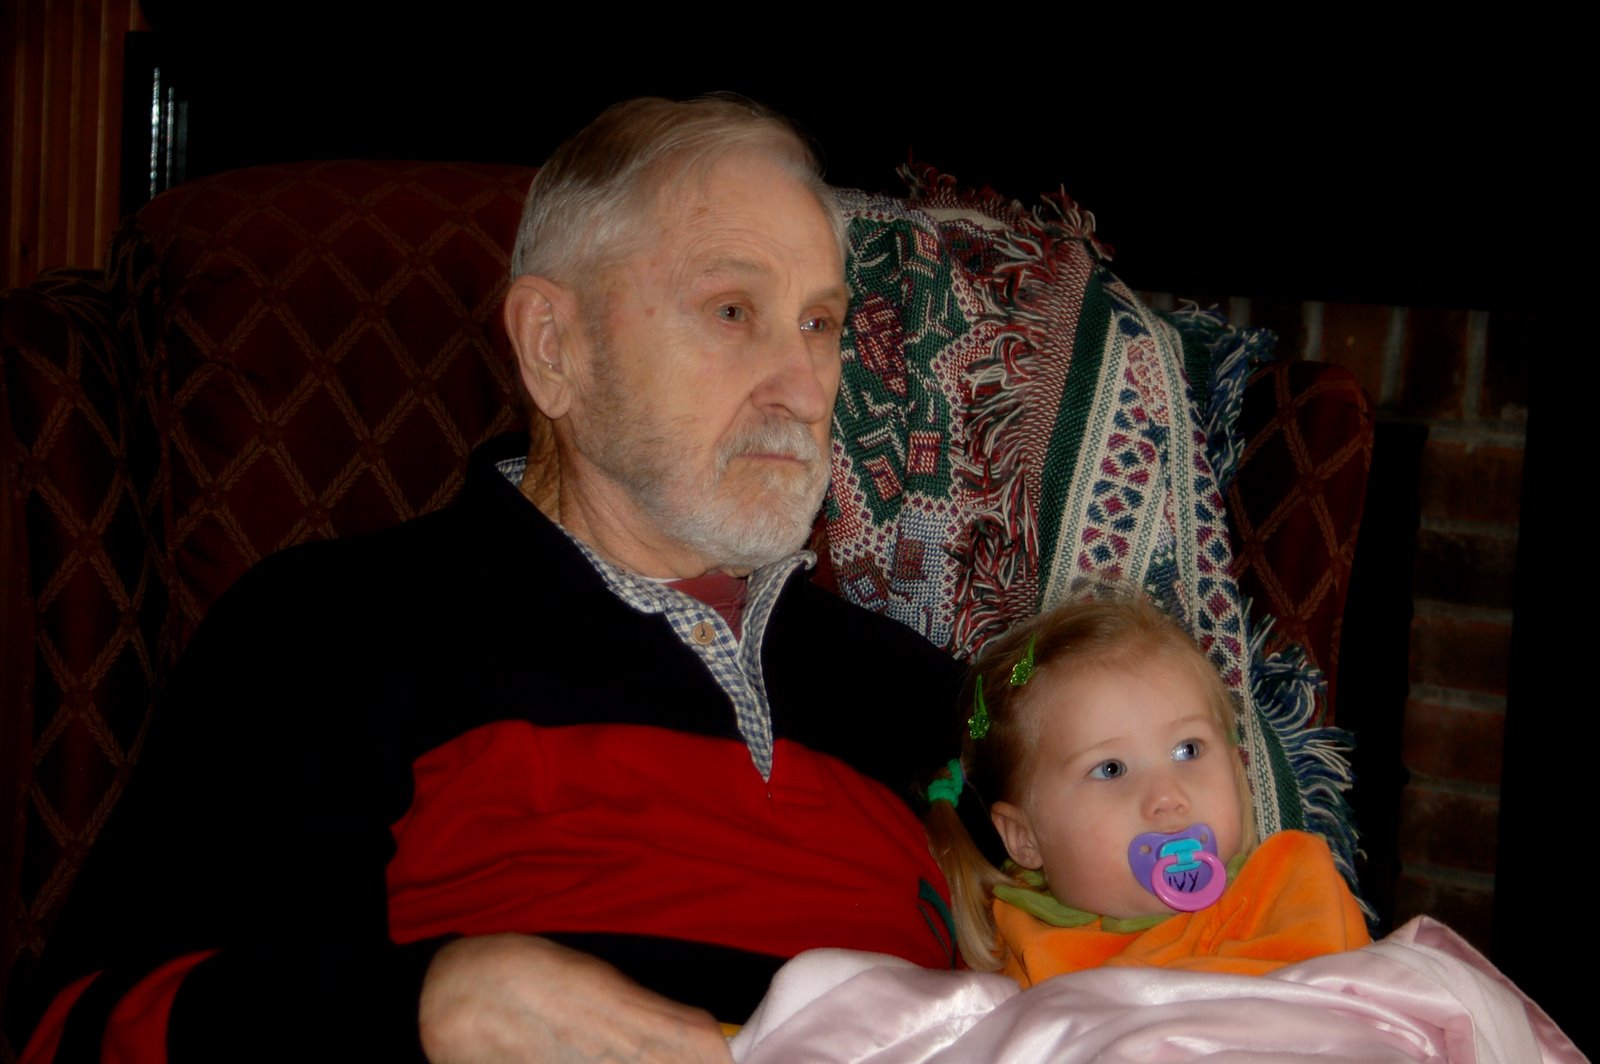 [Ivy+and+Great+Grandpa+Anderson+watching+a+movie+at+Grandpa's+house.jpg]